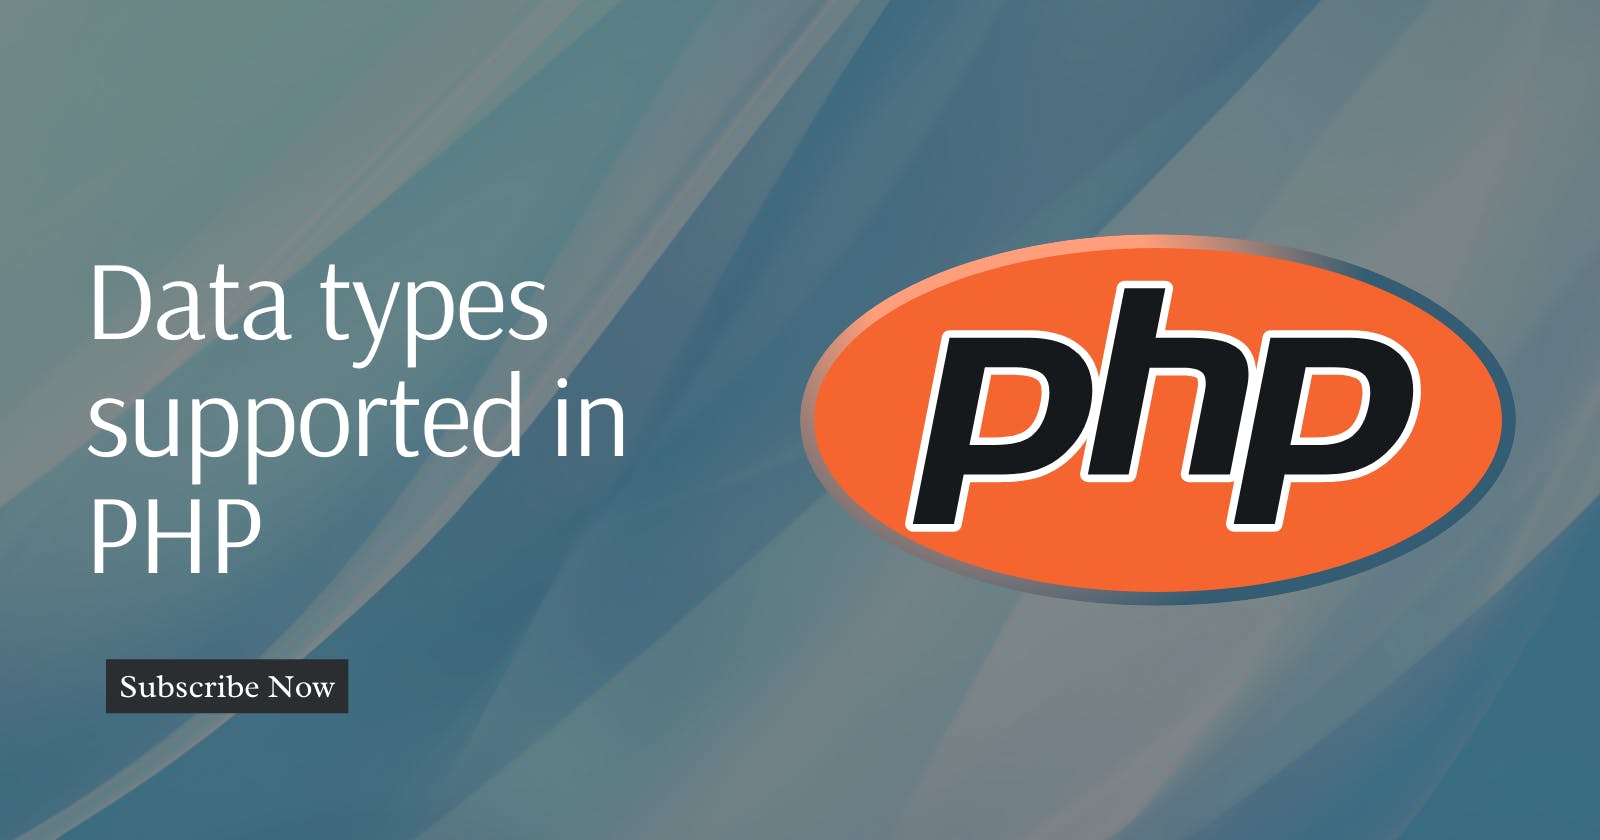 The Basic Data Types Supported in PHP